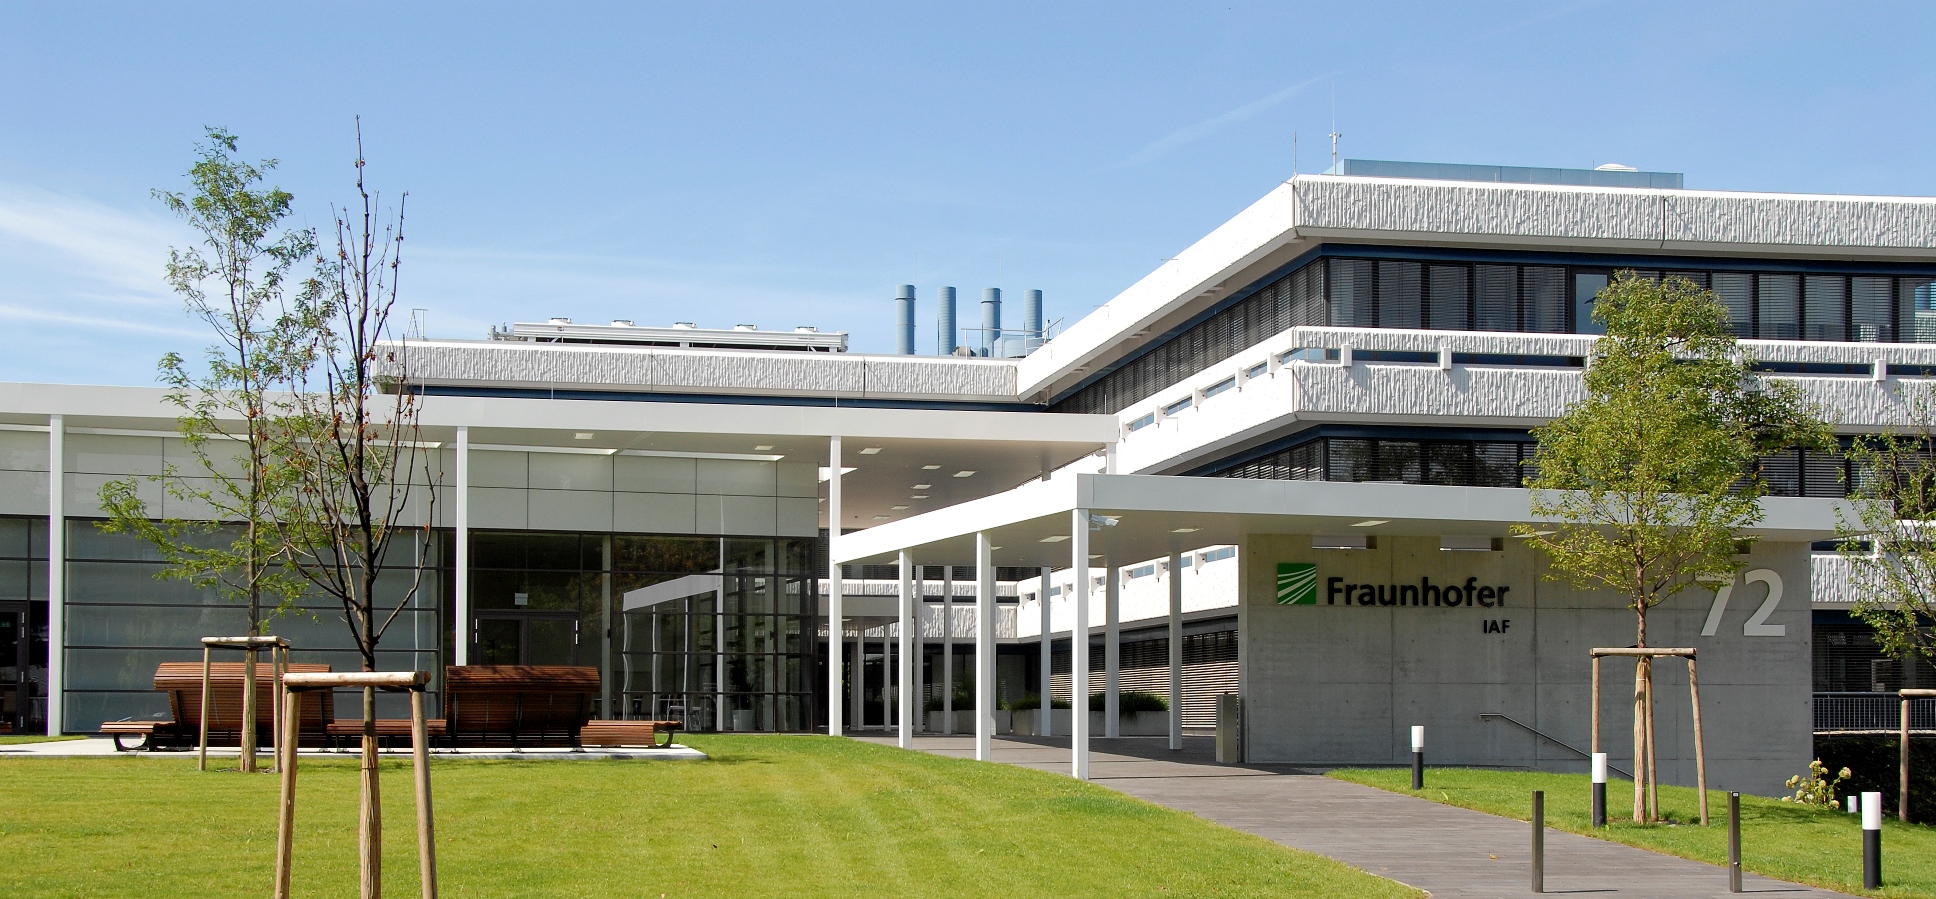 View to the entrance of the Fraunhofer IAF in Freiburg.